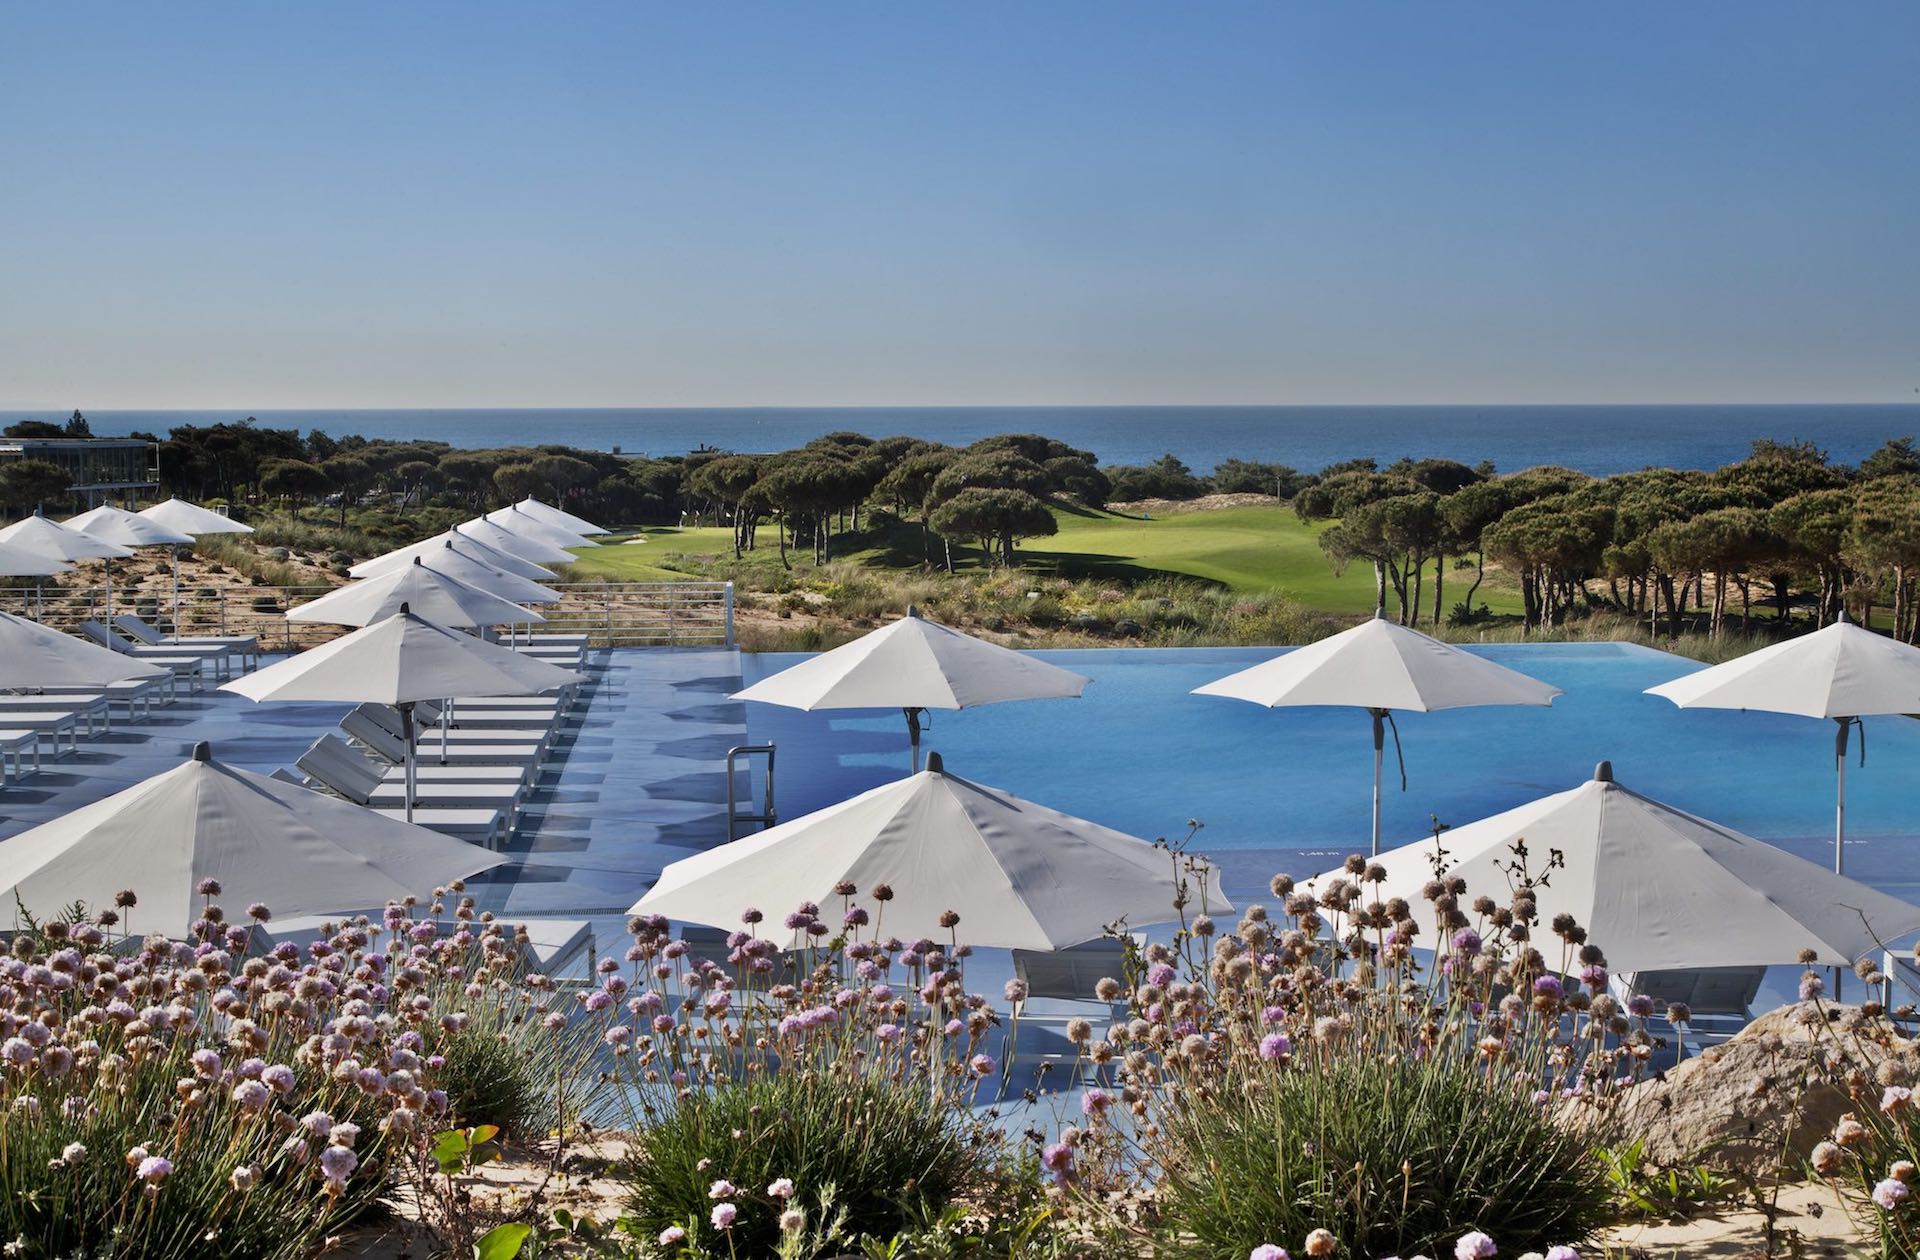 Atlantic Pool at The Oitavos - Oitavos Dunes - Portugal's Nº1 Golf Course